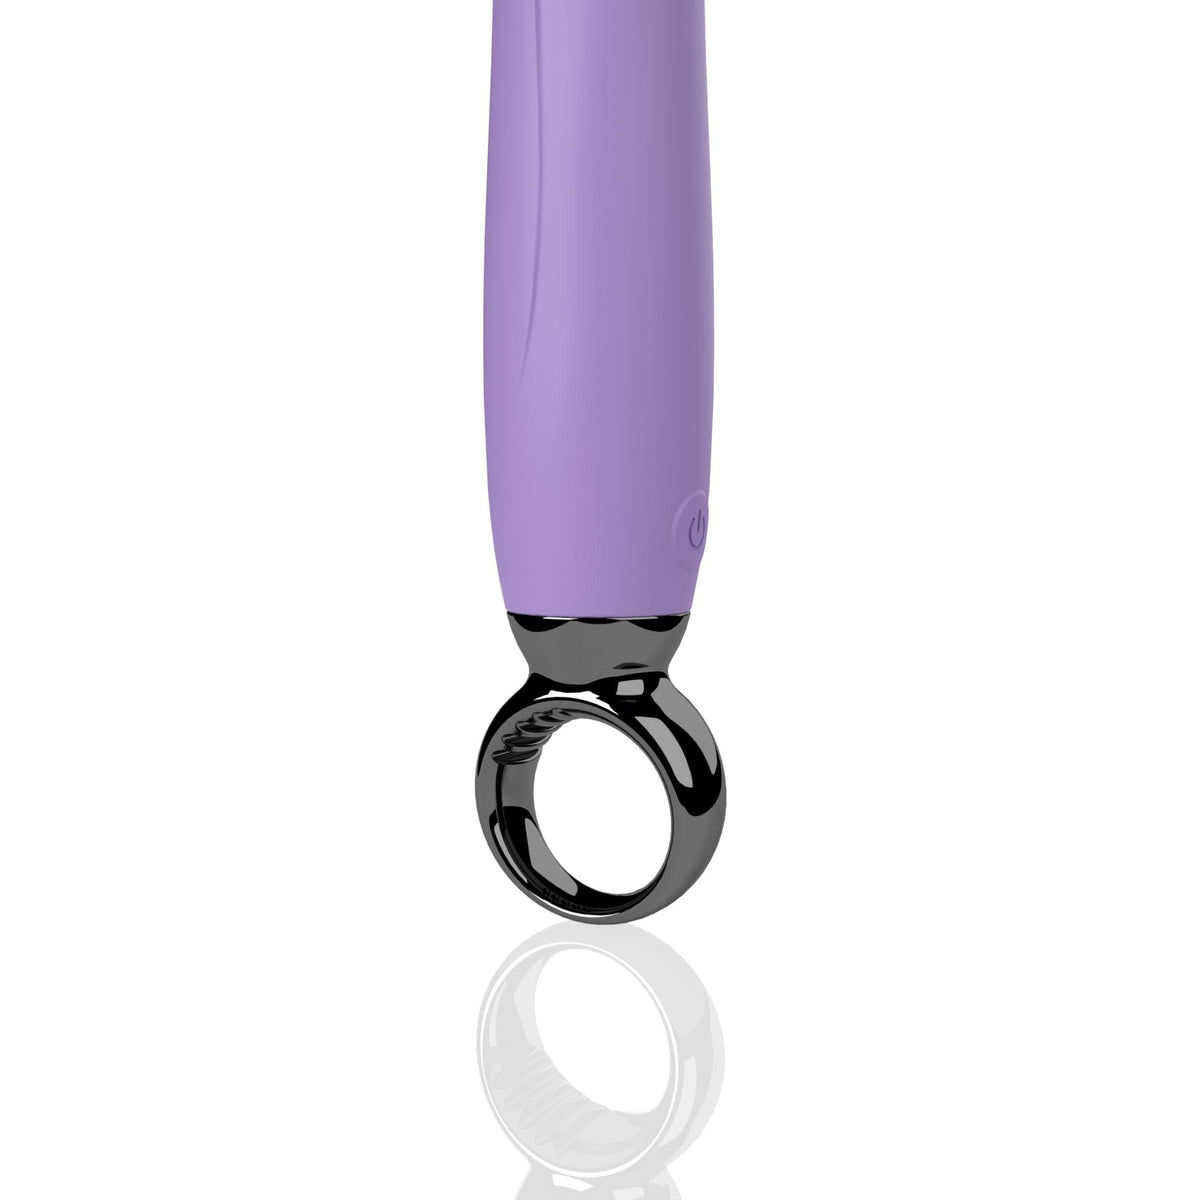 primo g spot rechargeable vibrator lilac